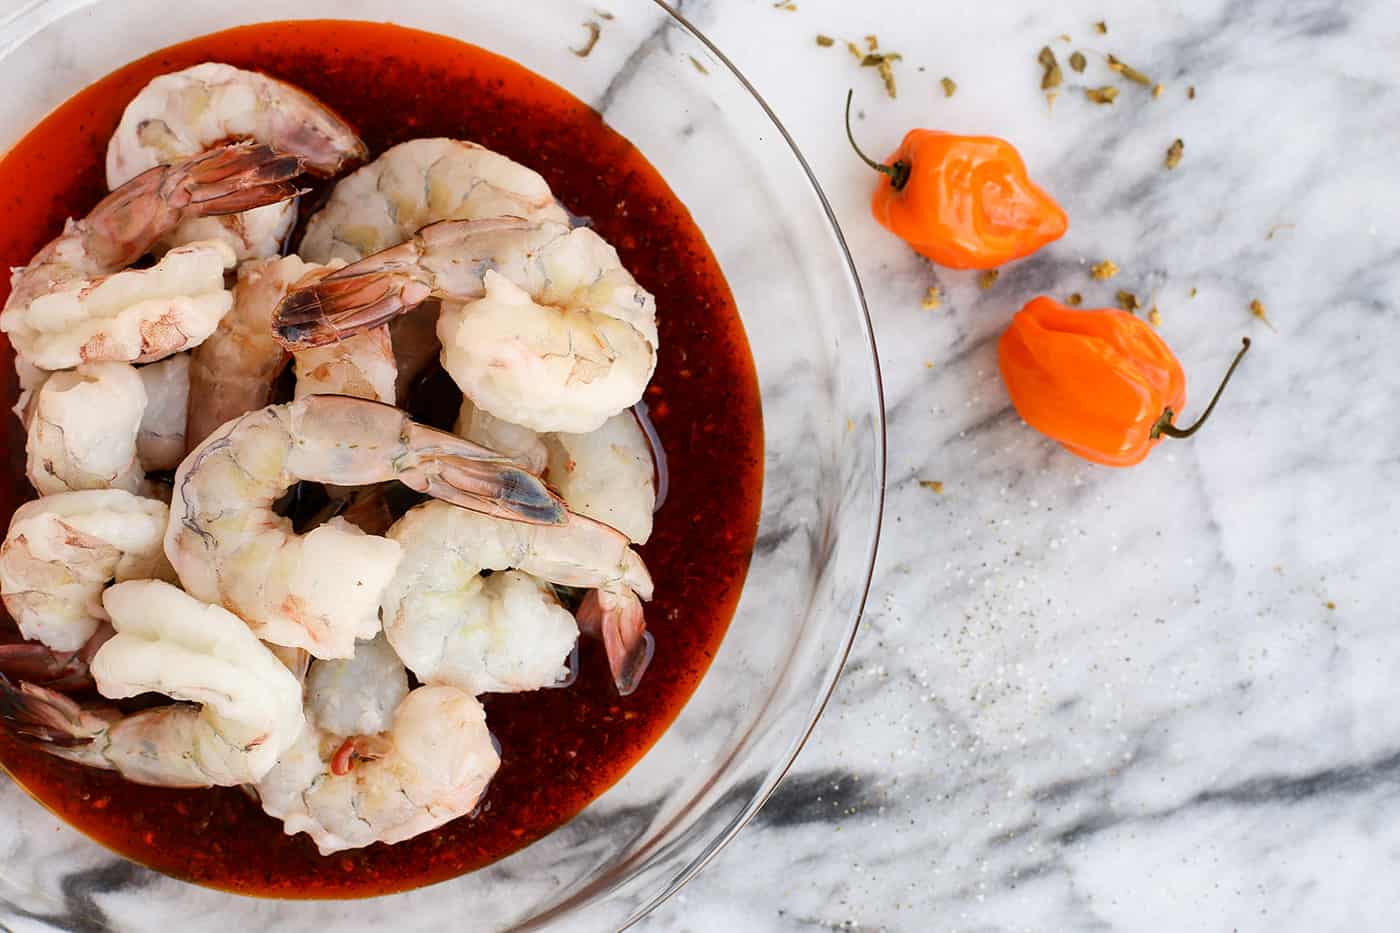 Overhead view of raw shrimp in a bowl of marinade next to two mini peppers